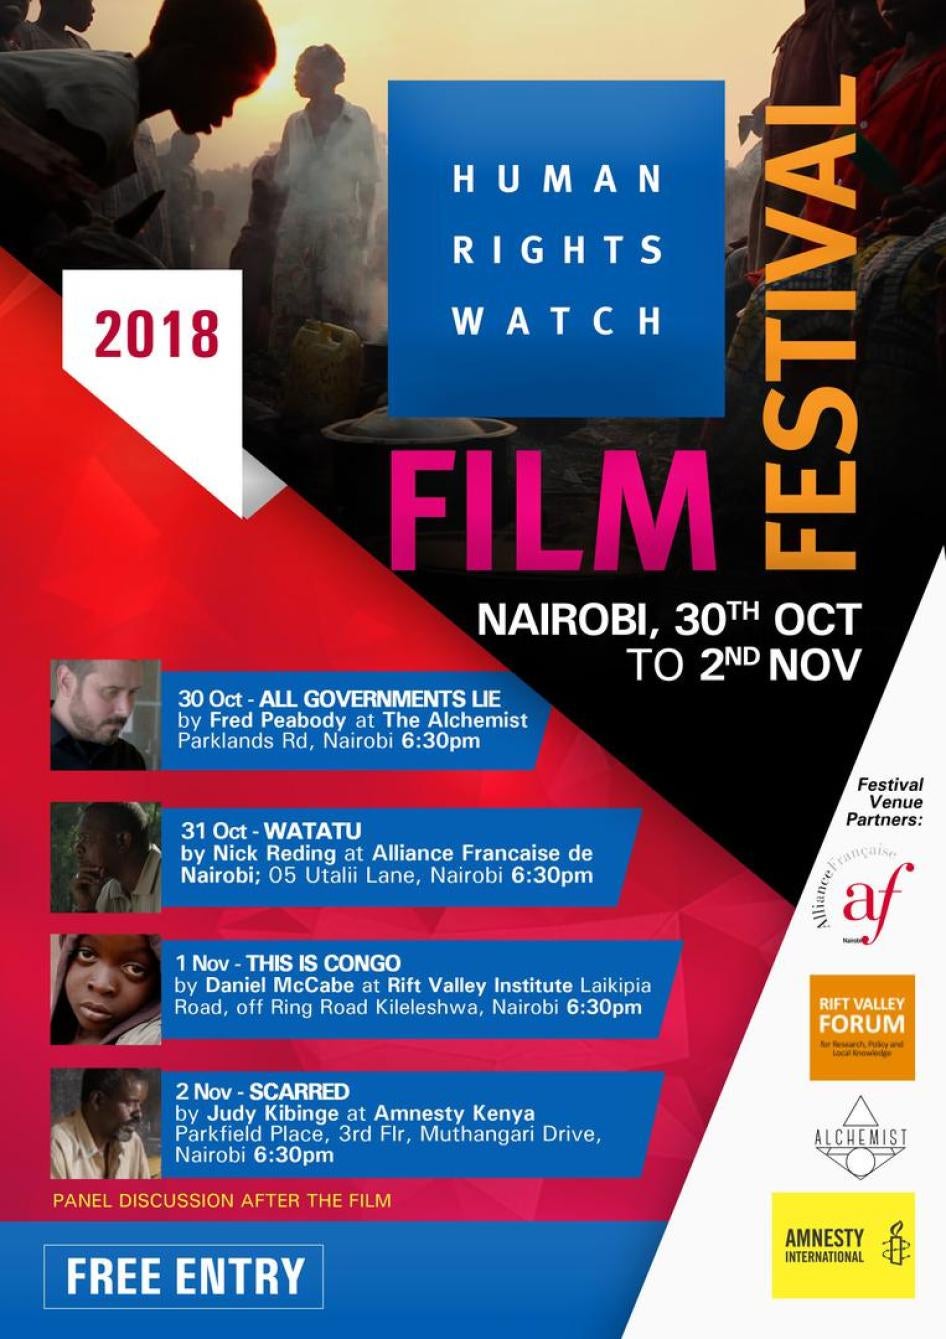 The 6th Nairobi Edition of the Human Rights Watch Film Festival will showcase four films from October 30 until November 2, 2018.